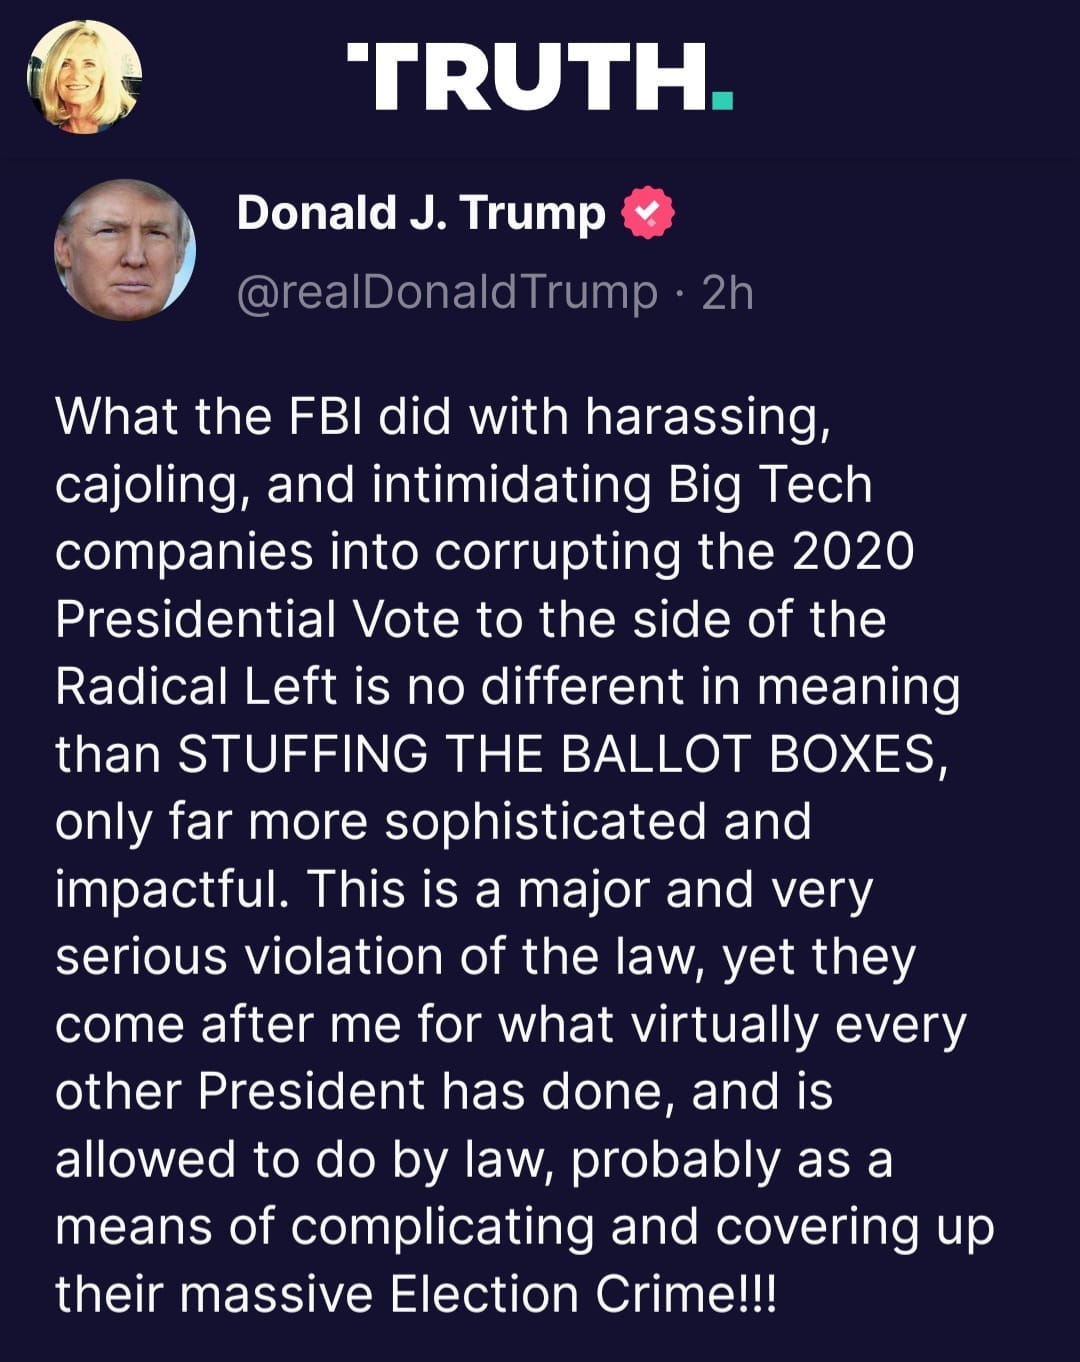 May be an image of 2 people and text that says 'TRUTH. Donald J. Trump @realDonaldTrump 2h What the FBI did with harassing, cajoling, and intimidating Big Tech companies into corrupting the 2020 Presidential Vote to the side of the Radical Left is no different in meaning than STUFFING THE BALLOT BOXES, only far more sophisticated and impactful. This is a major and very serious violation of the law, yet they come after me for what virtually every other President has done, and is allowed to do by law, probably as a means of complicating and covering up their massive Election Crime!!!'